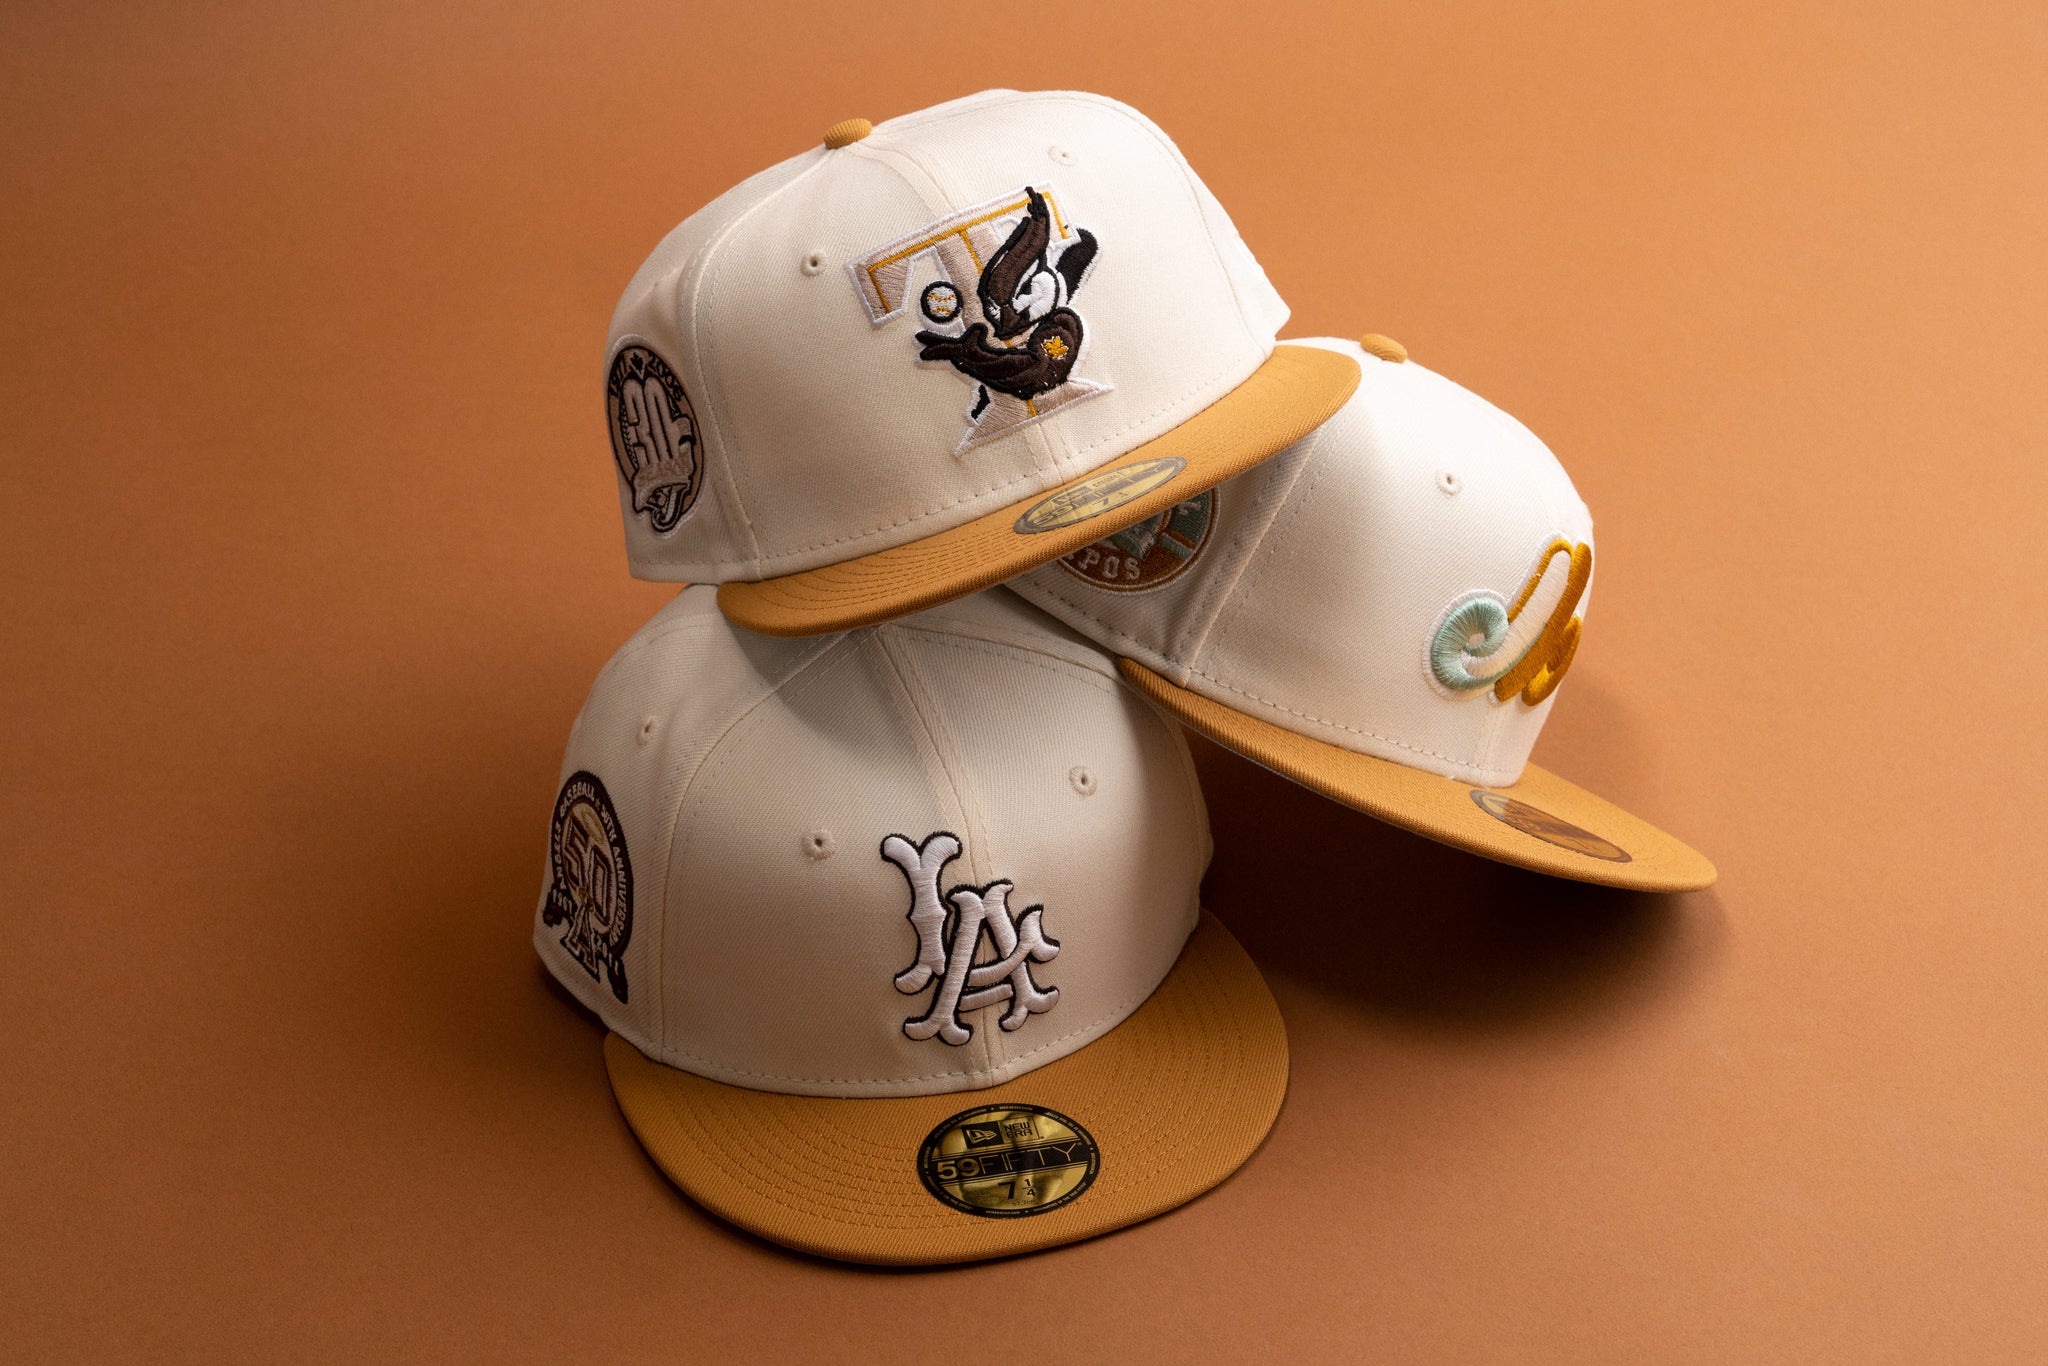 New Era 59FIFTY "Sandstorm" Collection 13/12/22 – Capsule